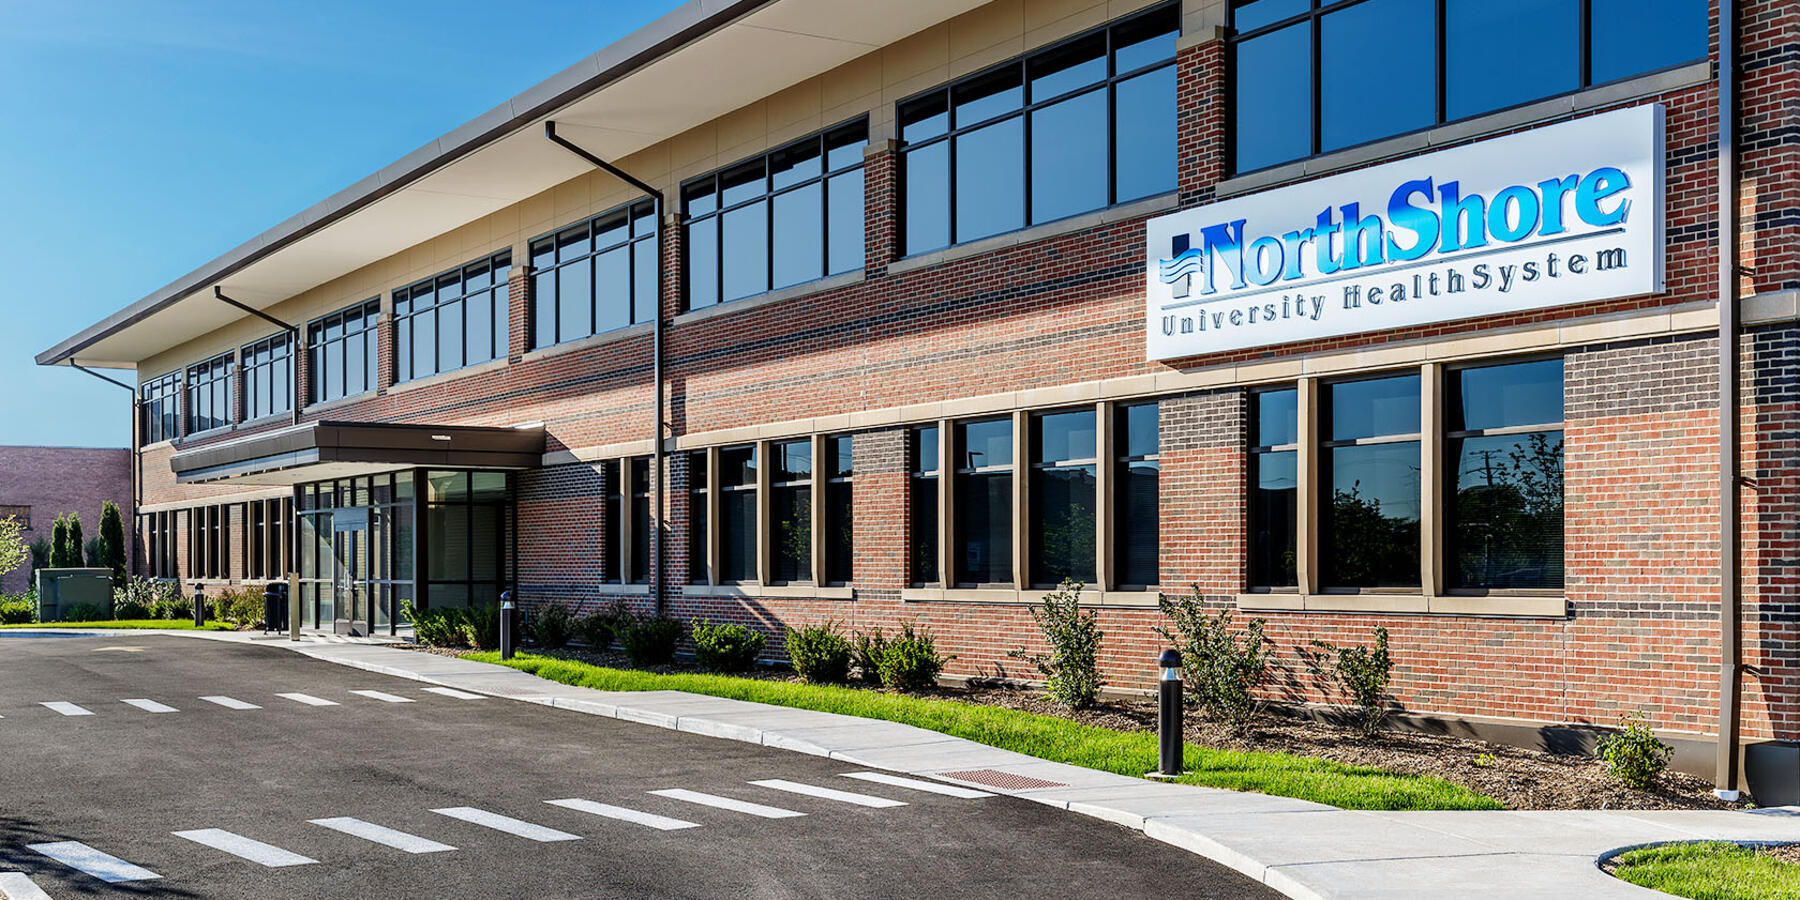 Medical Office Construction Company - Northshore Niles exterior entrance with sign